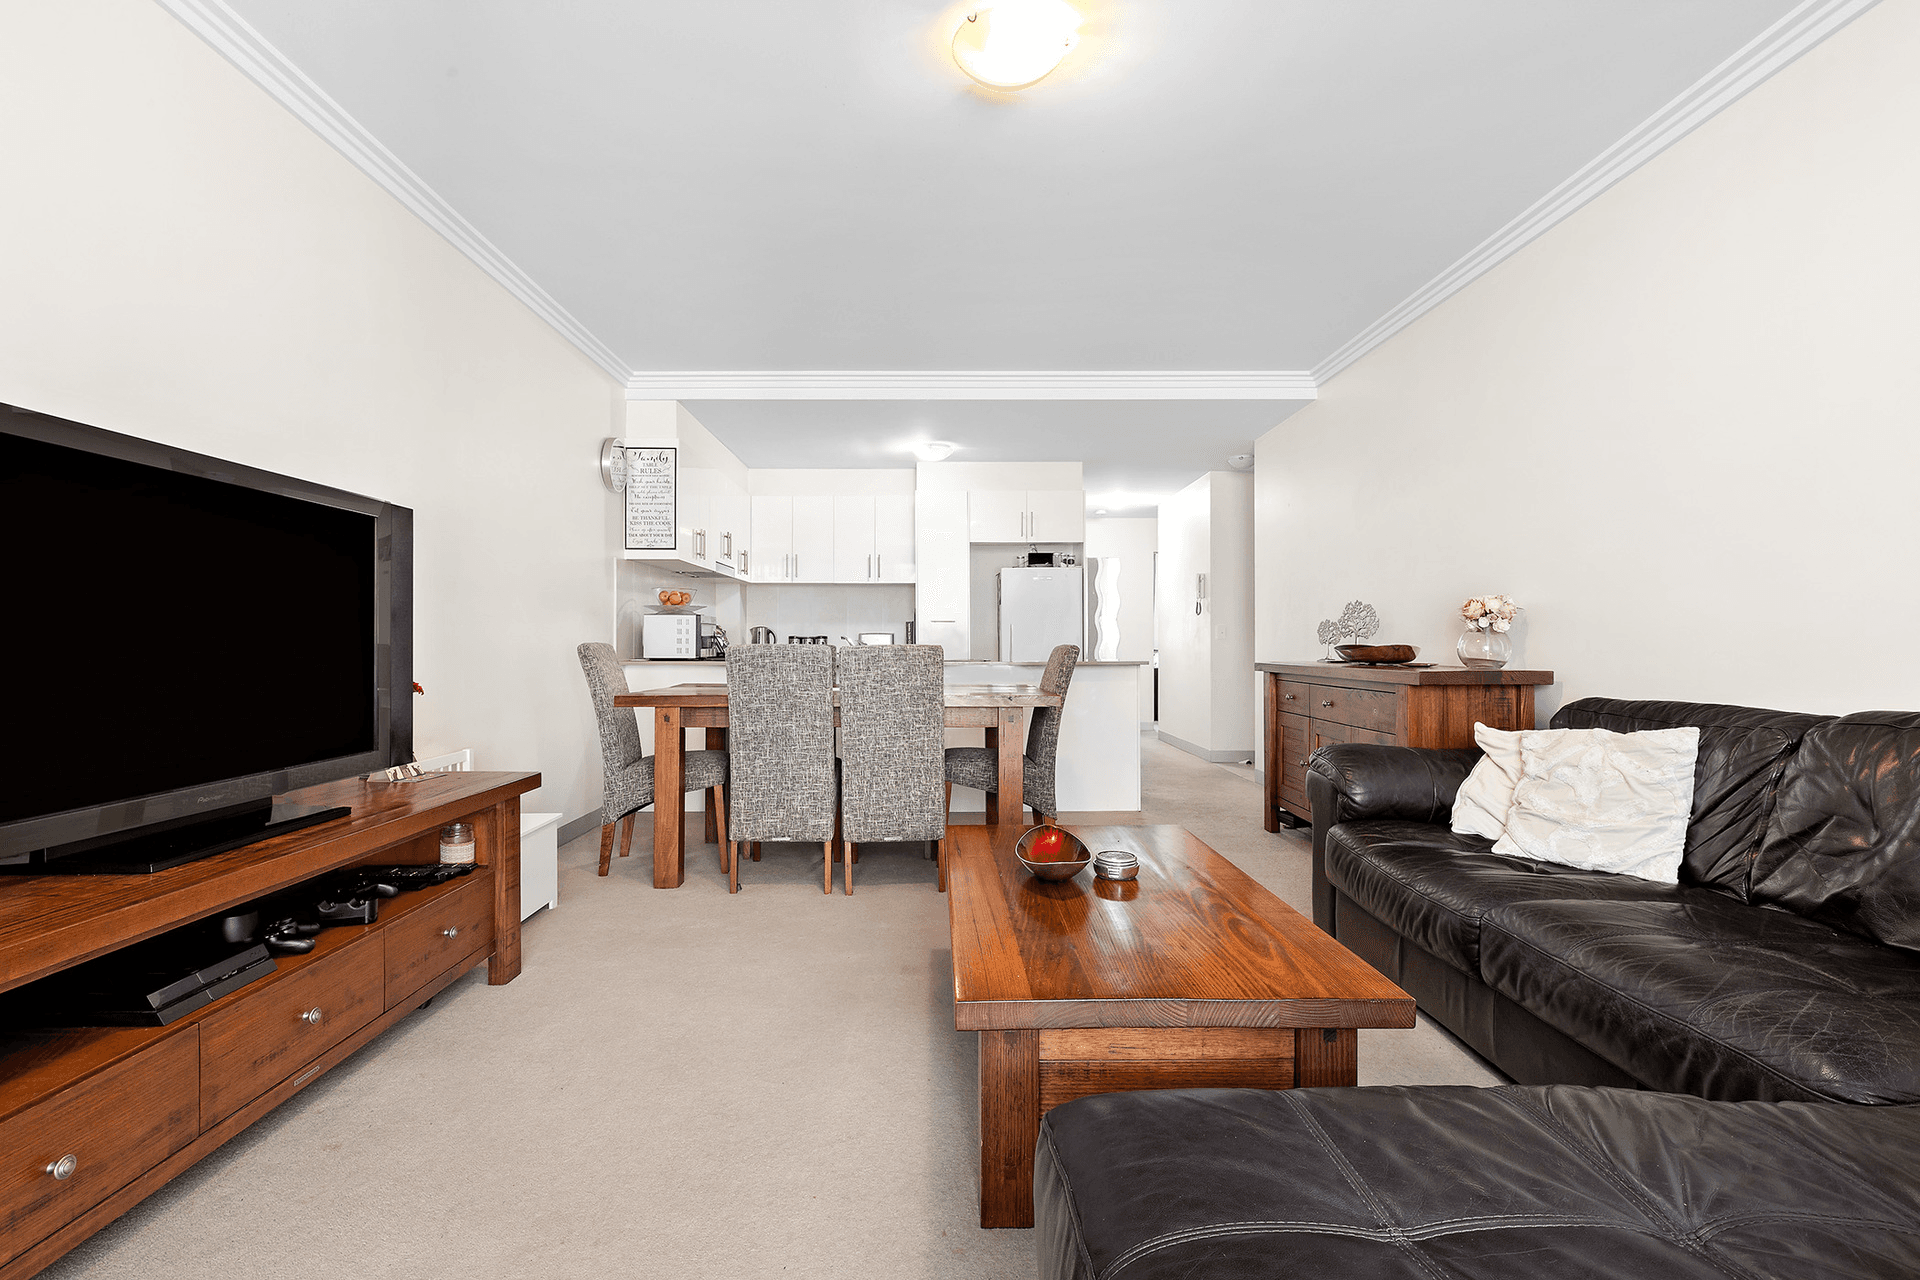 28/41 Roseberry Street, Manly Vale, NSW 2093